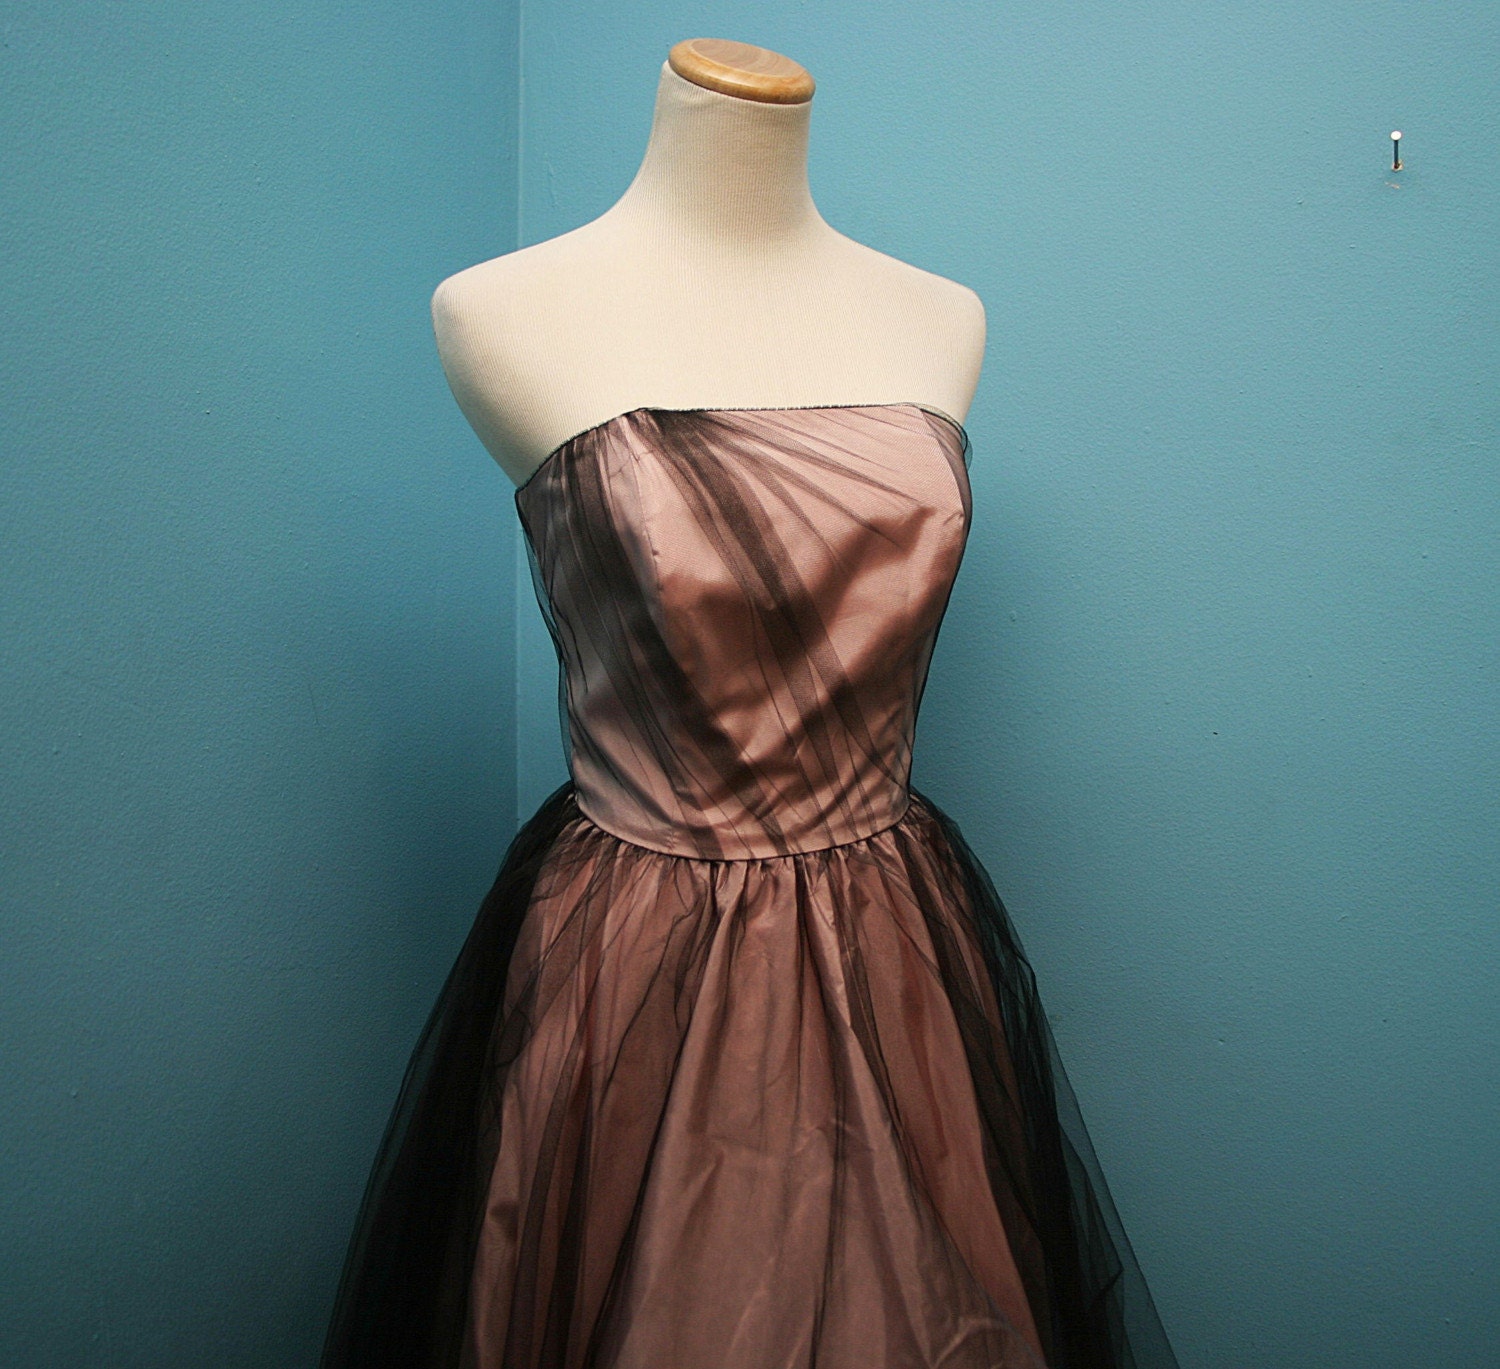 VTG Pink BALLERINA Princess GOWN with BLACK Net Overlay  XS/S